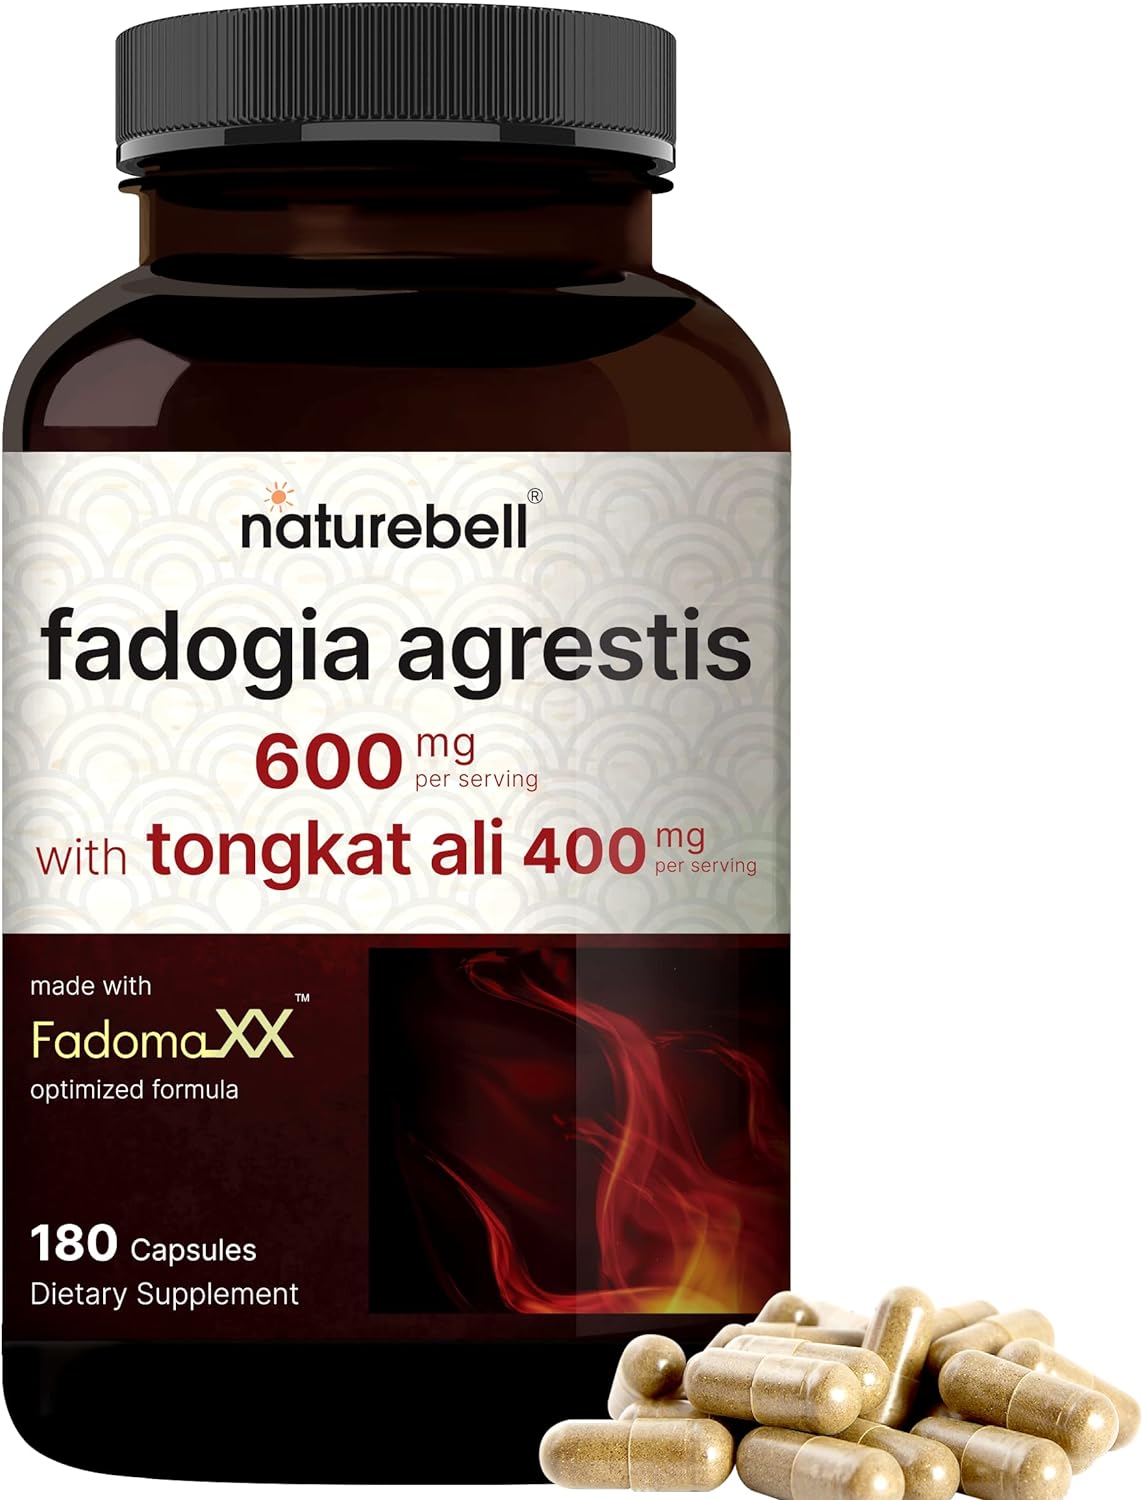 NatureBell Fadogia Agrestis 600mg Complexed with Tongkat Ali 400mg 180 Capsules Optimal Dosage for Enhanced Bioavailability